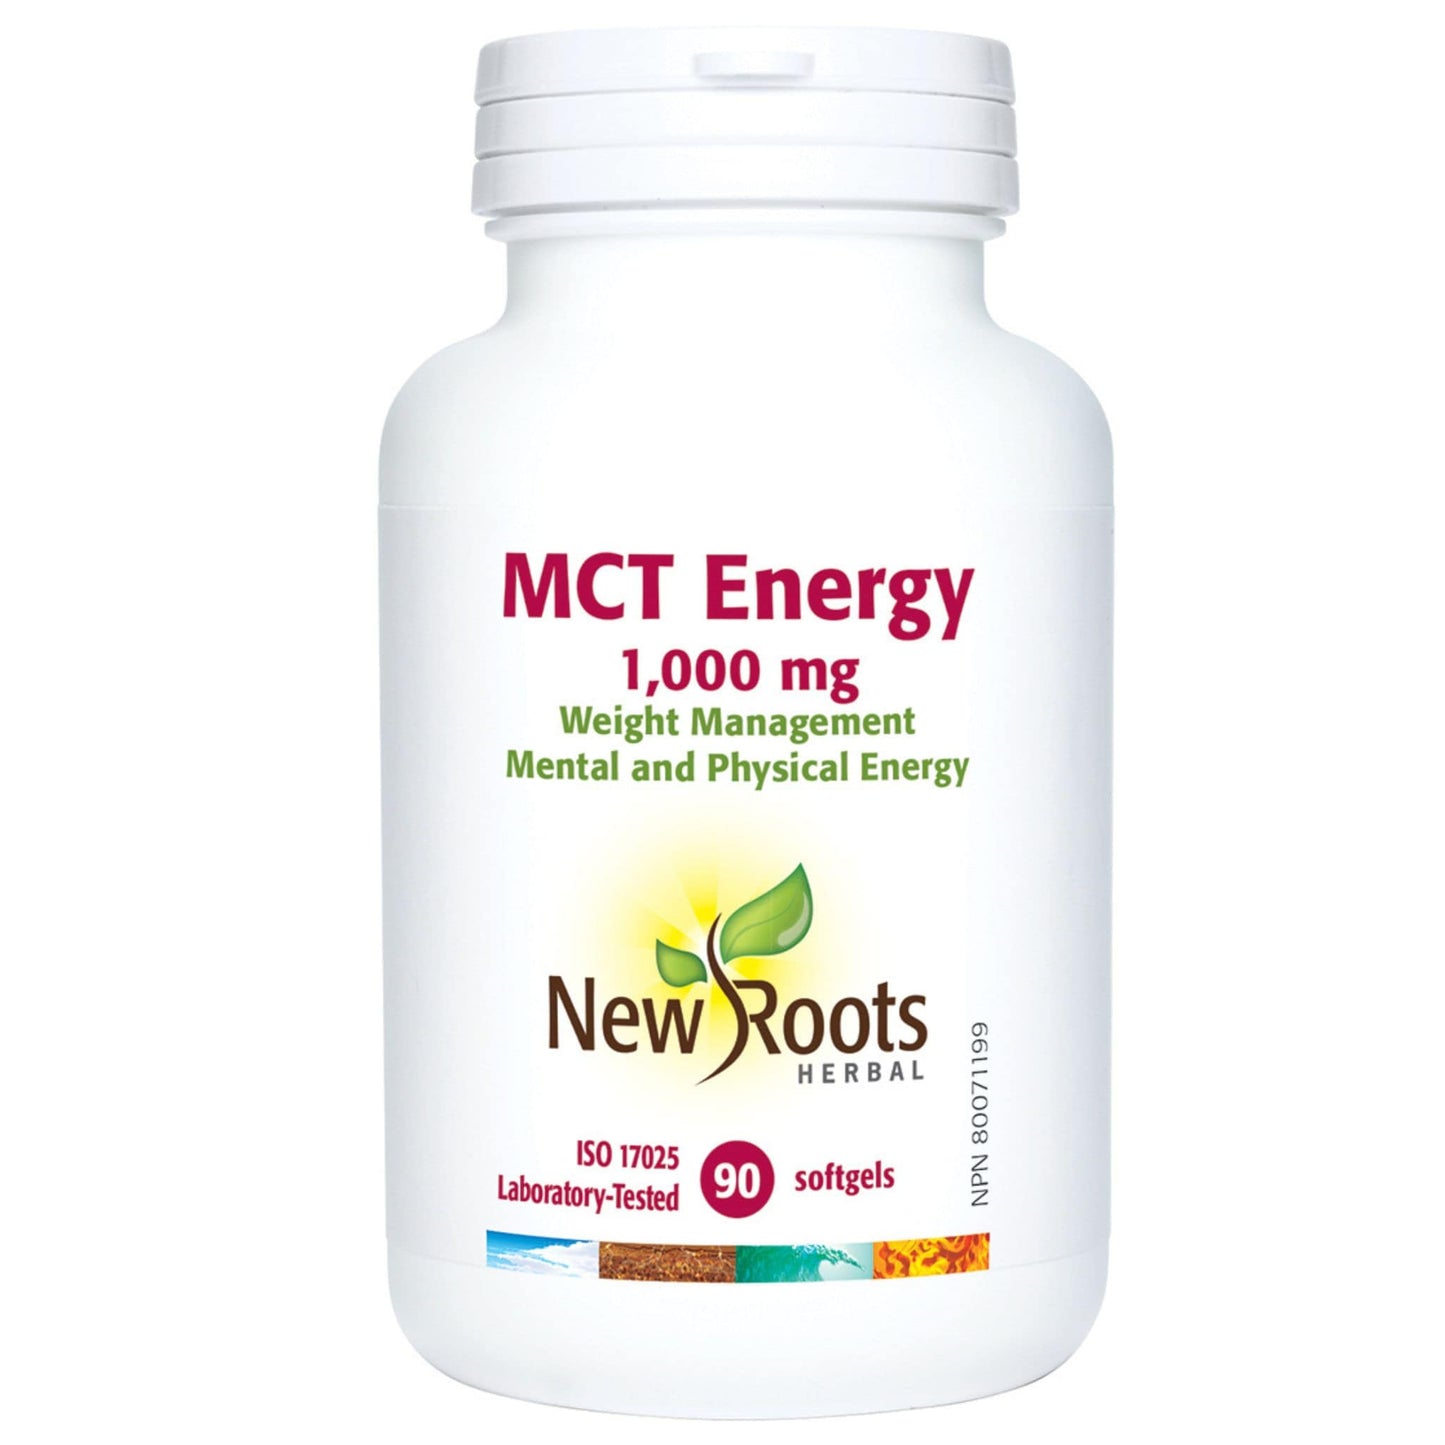 90 Softgels | New Roots Herbal MCT Energy 1000mg Weight Management bottle